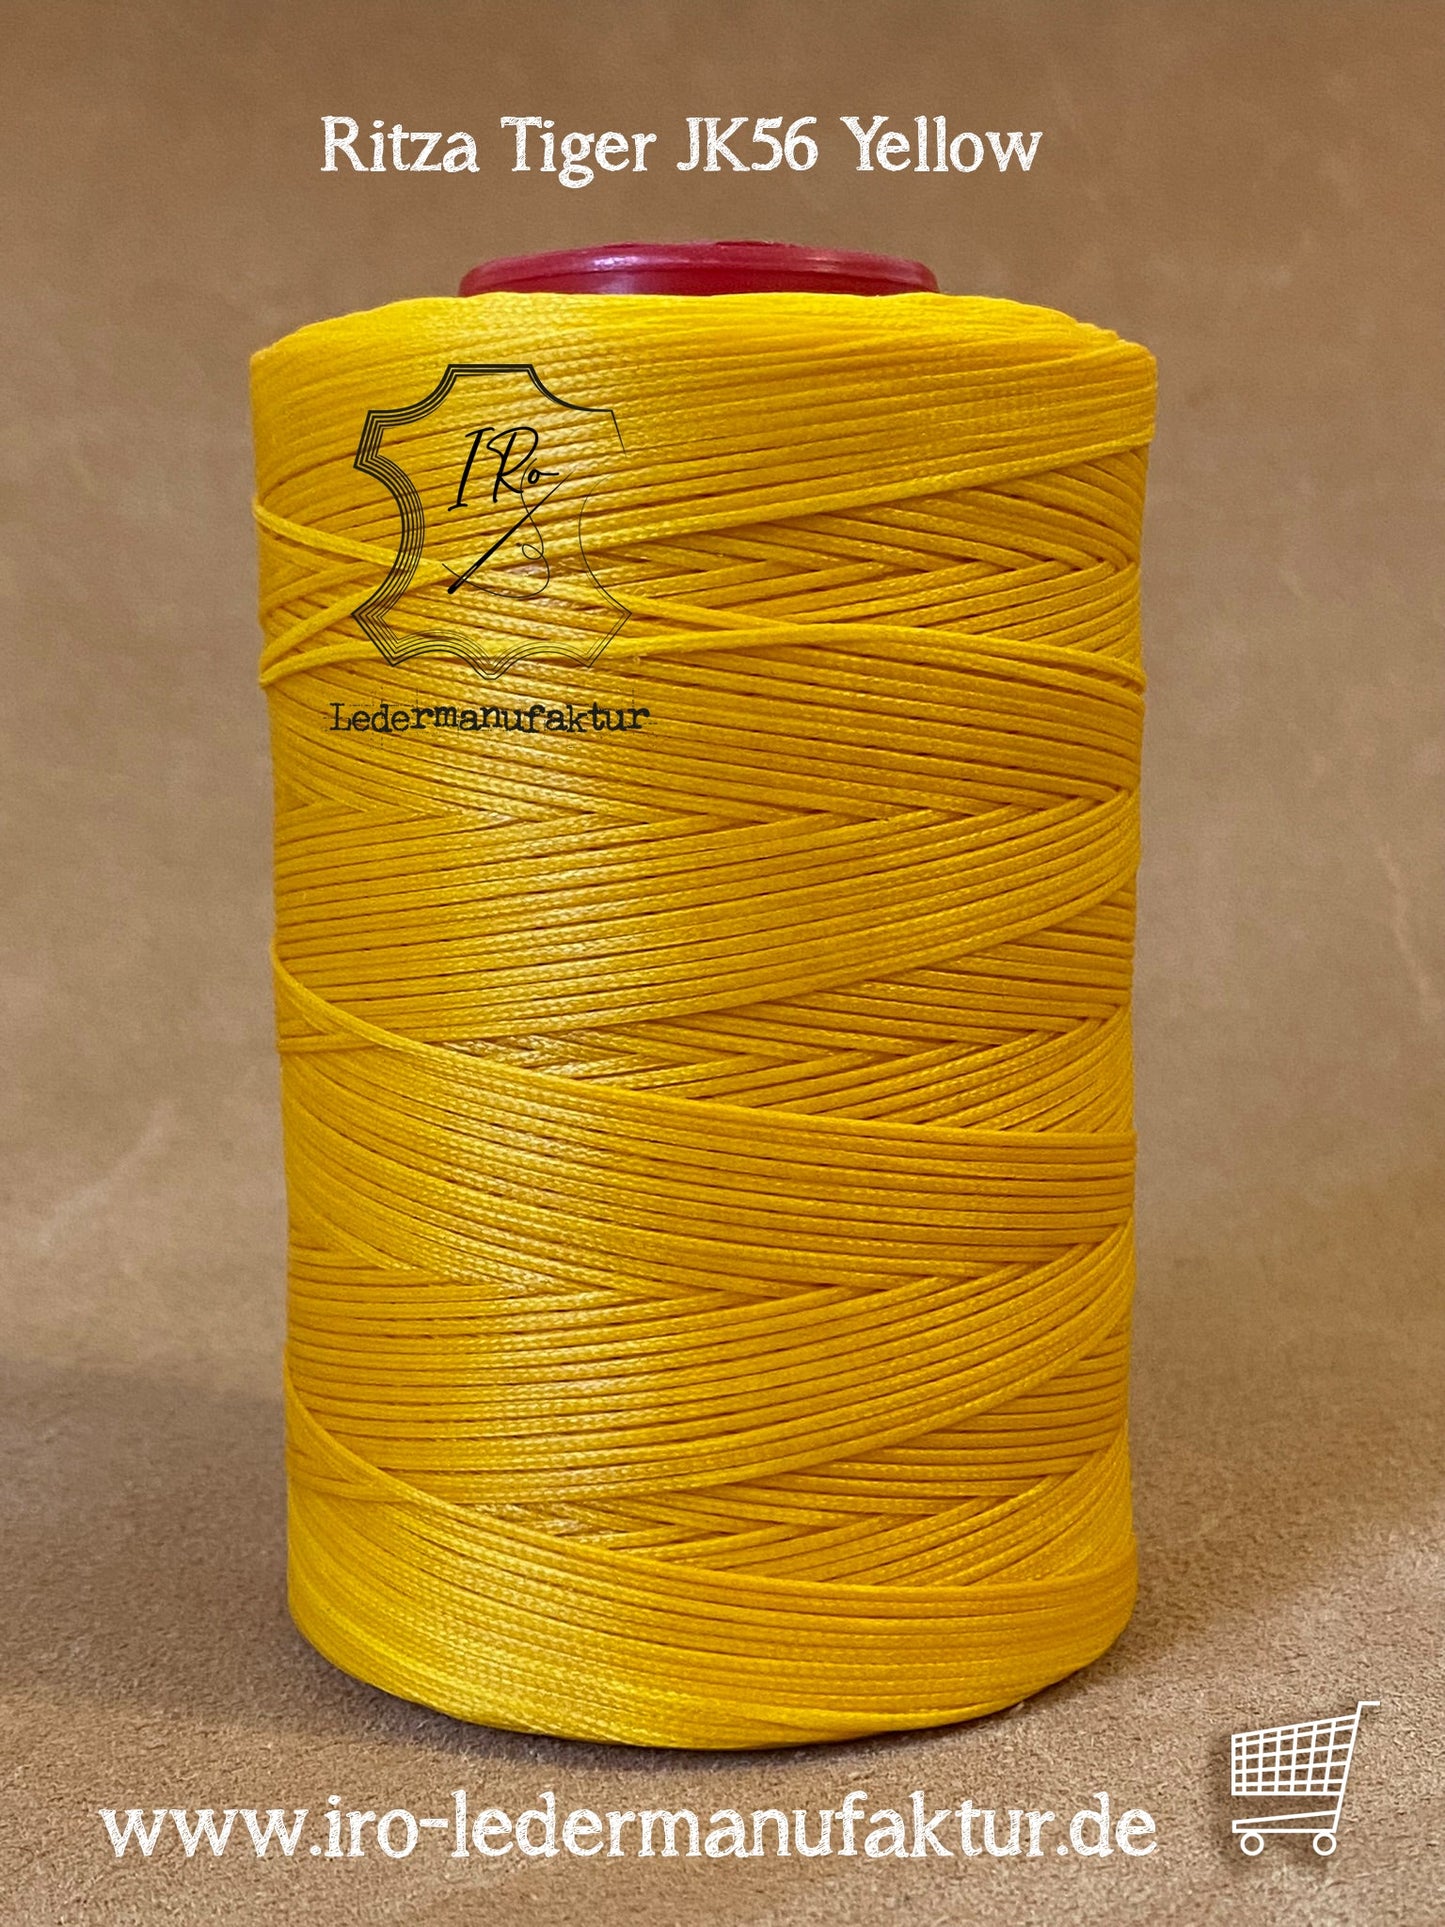 1 mm Ritza 25 tiger 500 m Spule | Sewing thread for leather, waxed. Hand stitch, hand sewing thread, flat shape